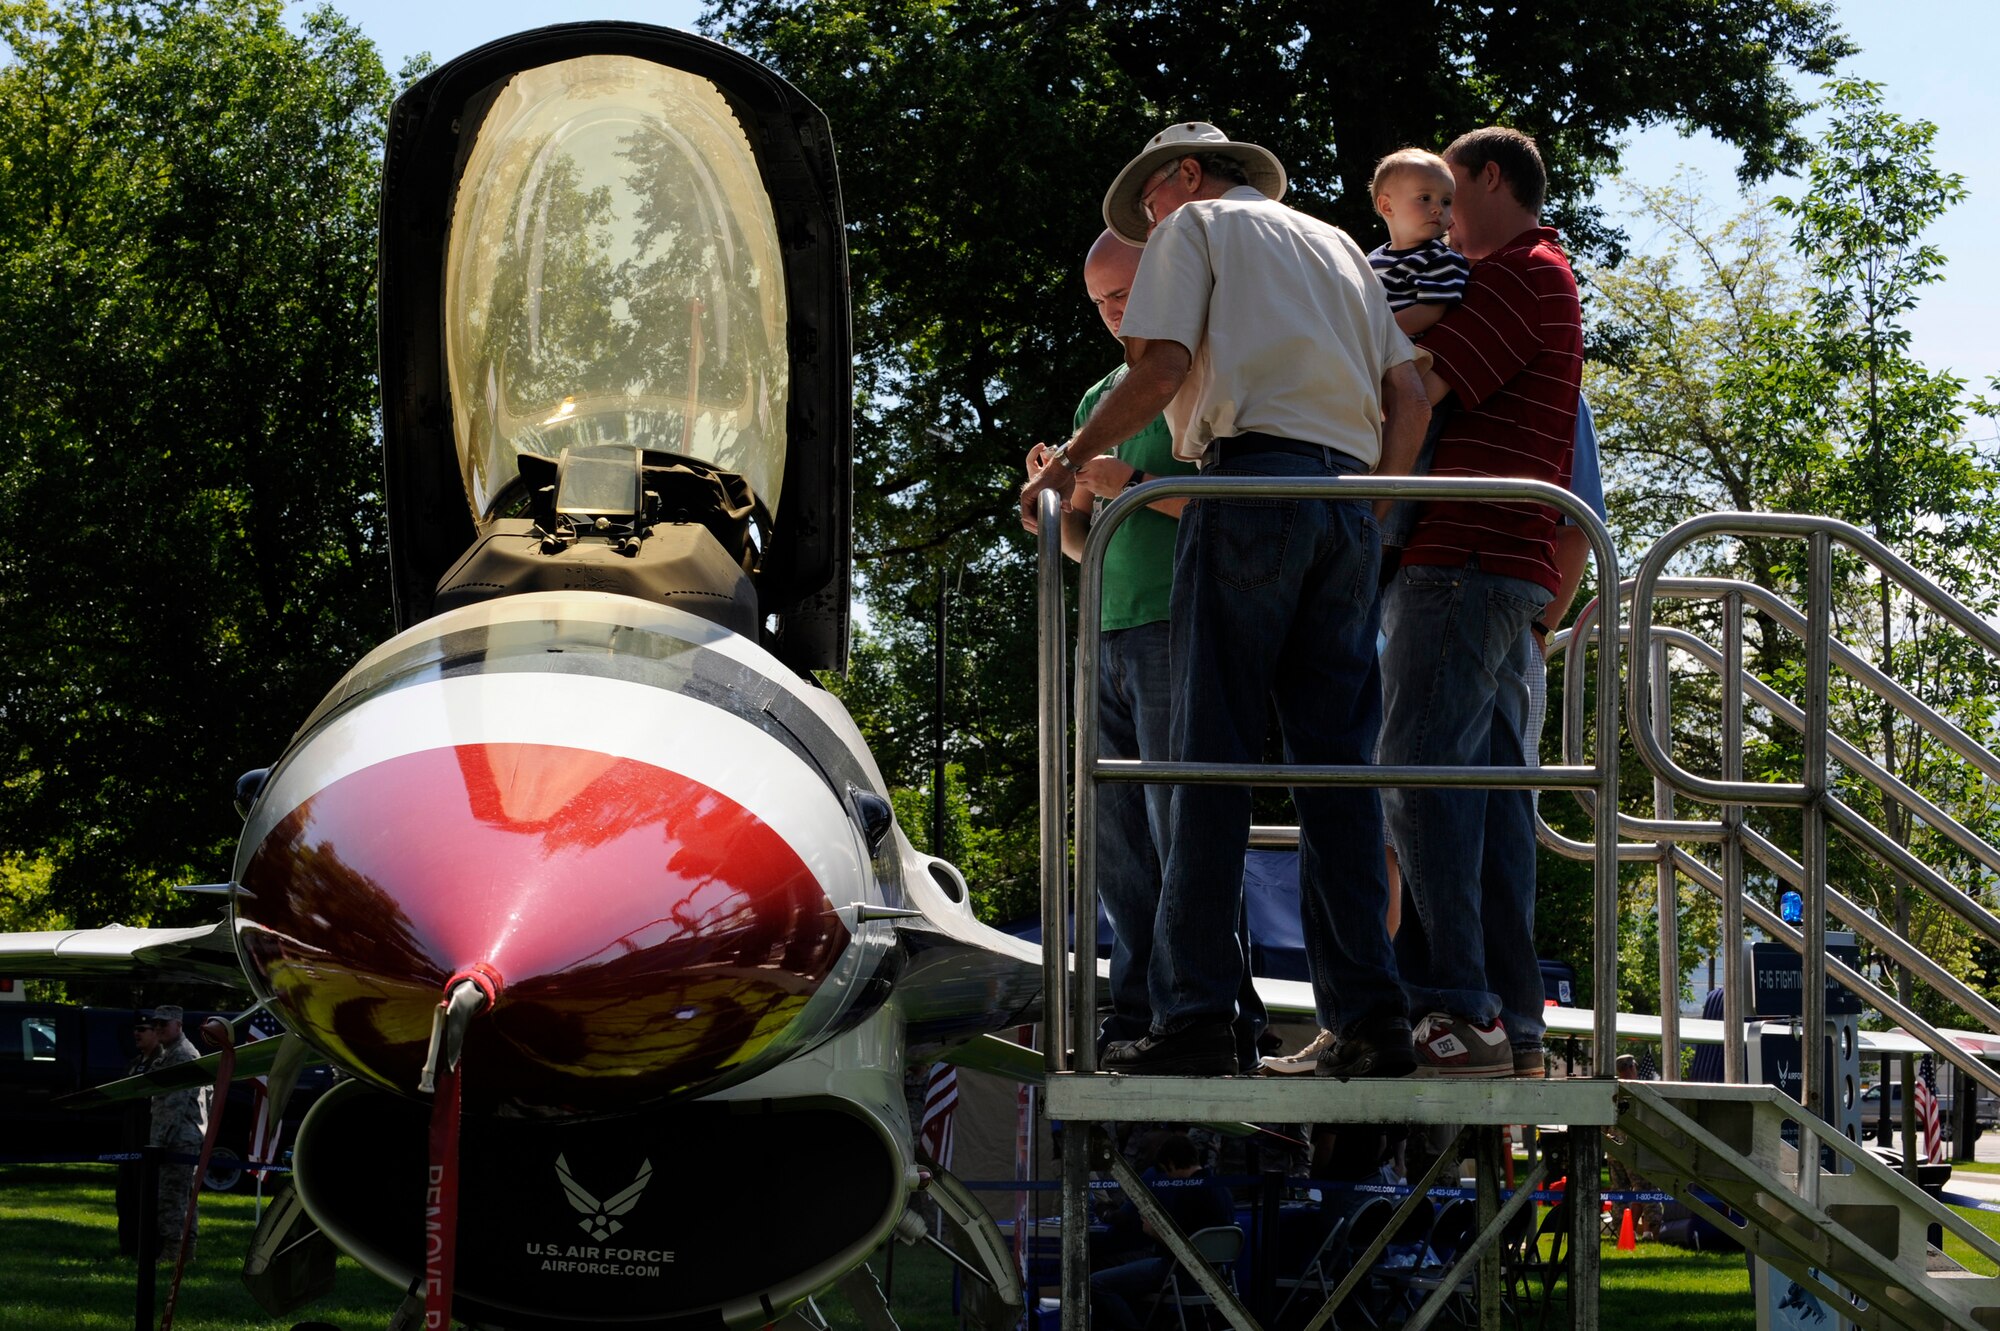 Salt Lake City locals check out an F-16 Fighting Falcon on display at the "Our Nation's Defenders Showcase" at Pioneer Park for Air Force Week Salt Lake City June 2. The showcase includes many Air Force booths, displays and performances by the band "Max Impact," a performance unit with the United States Air Force Band from Bolling Air Force Base, Washington, D.C.  Air Force Week-Salt Lake City is Jun. 1 to 7 and has events throughout the area. (U.S. Air Force photo/Staff Sgt. Desiree N. Palacios)